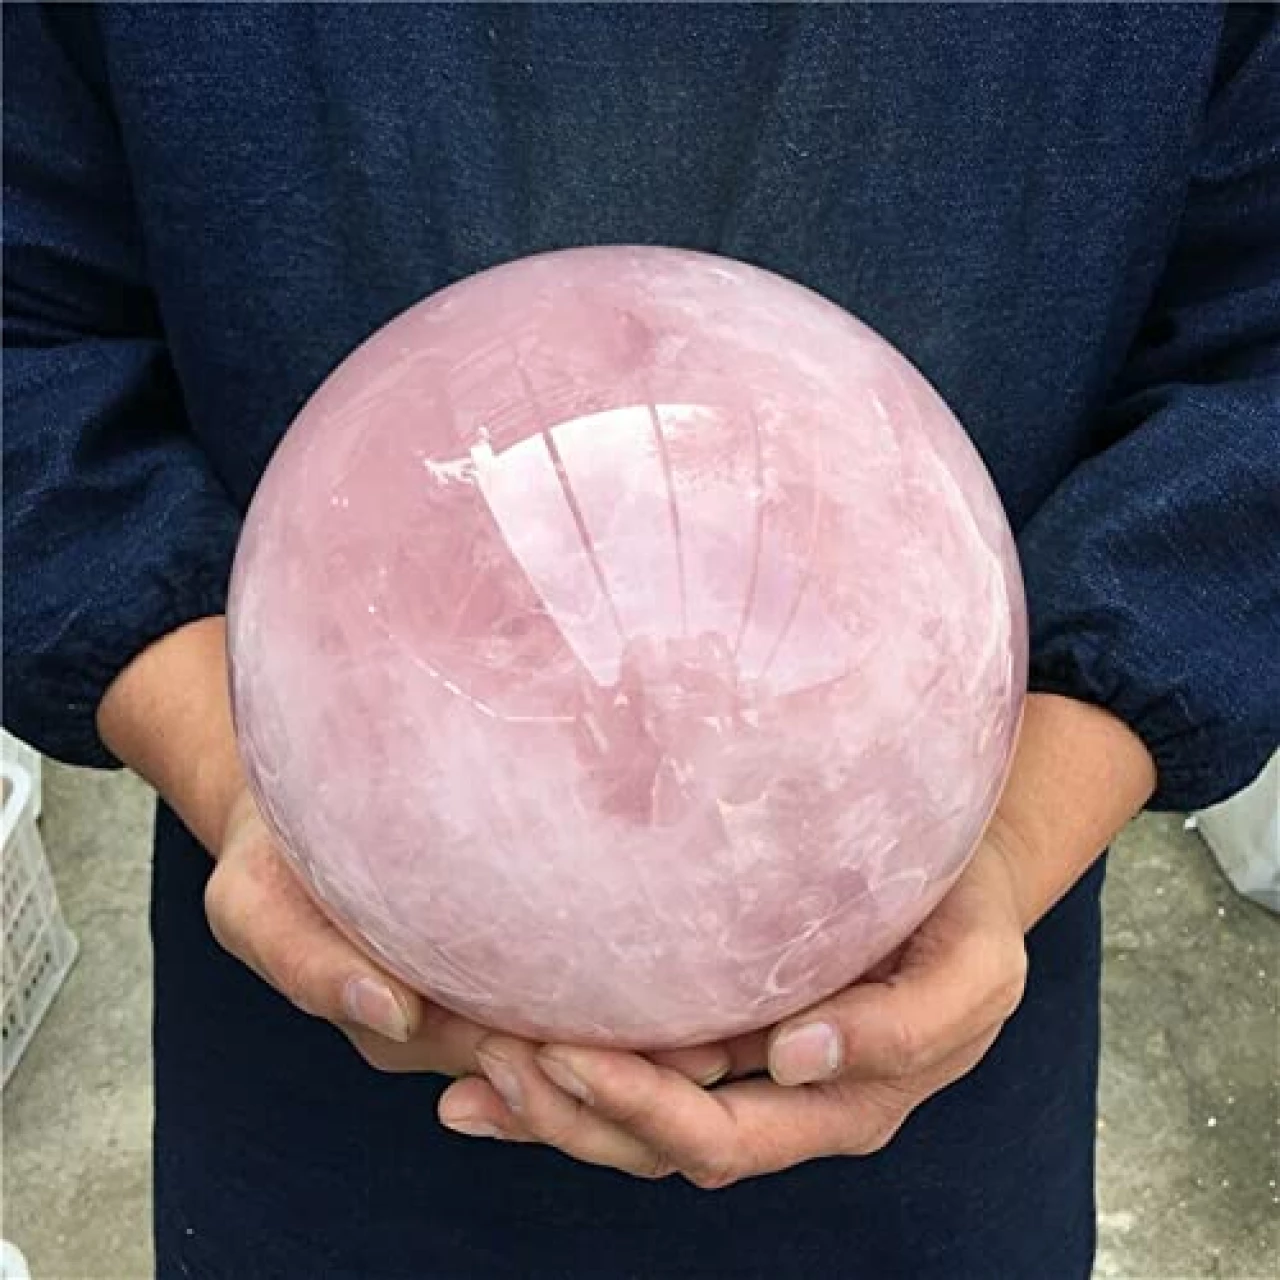 XUQULI Natural Crystals and Stones Natural Pink Rose Quartz Sphere Crystal Ball Healing for Decoration (Size : 95-100mm)